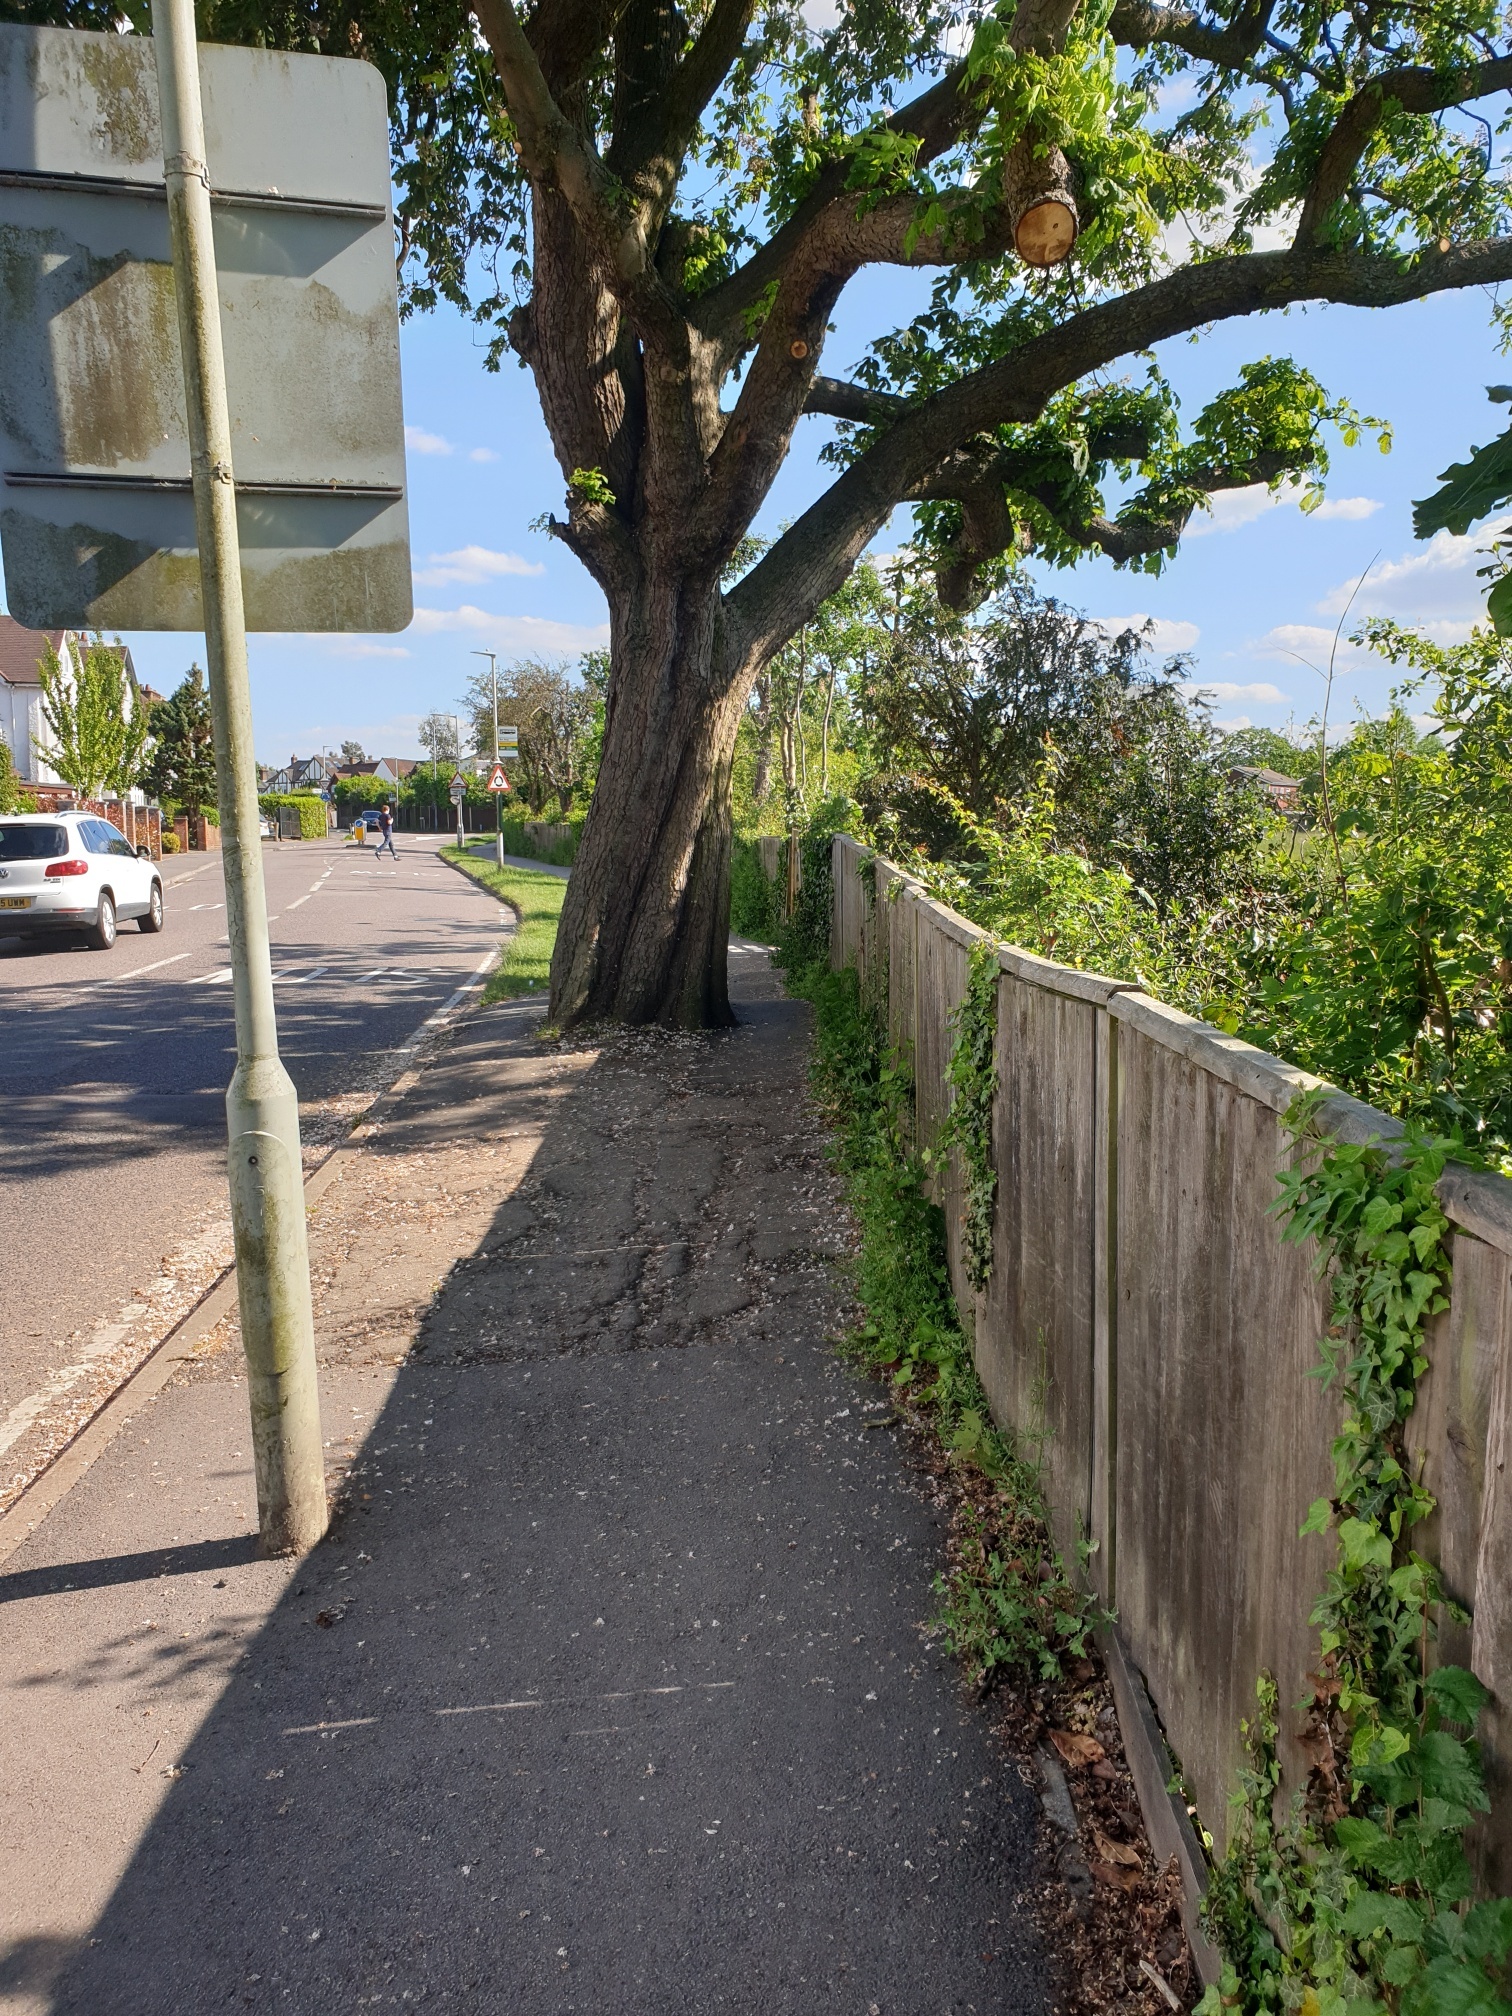 The chestnut tree is restricting access on the pavement. Credit: Laurence Brass. The proposal is to move the fence, shown on the right, by the tree to create a wider space. Credit: Laurence Brass